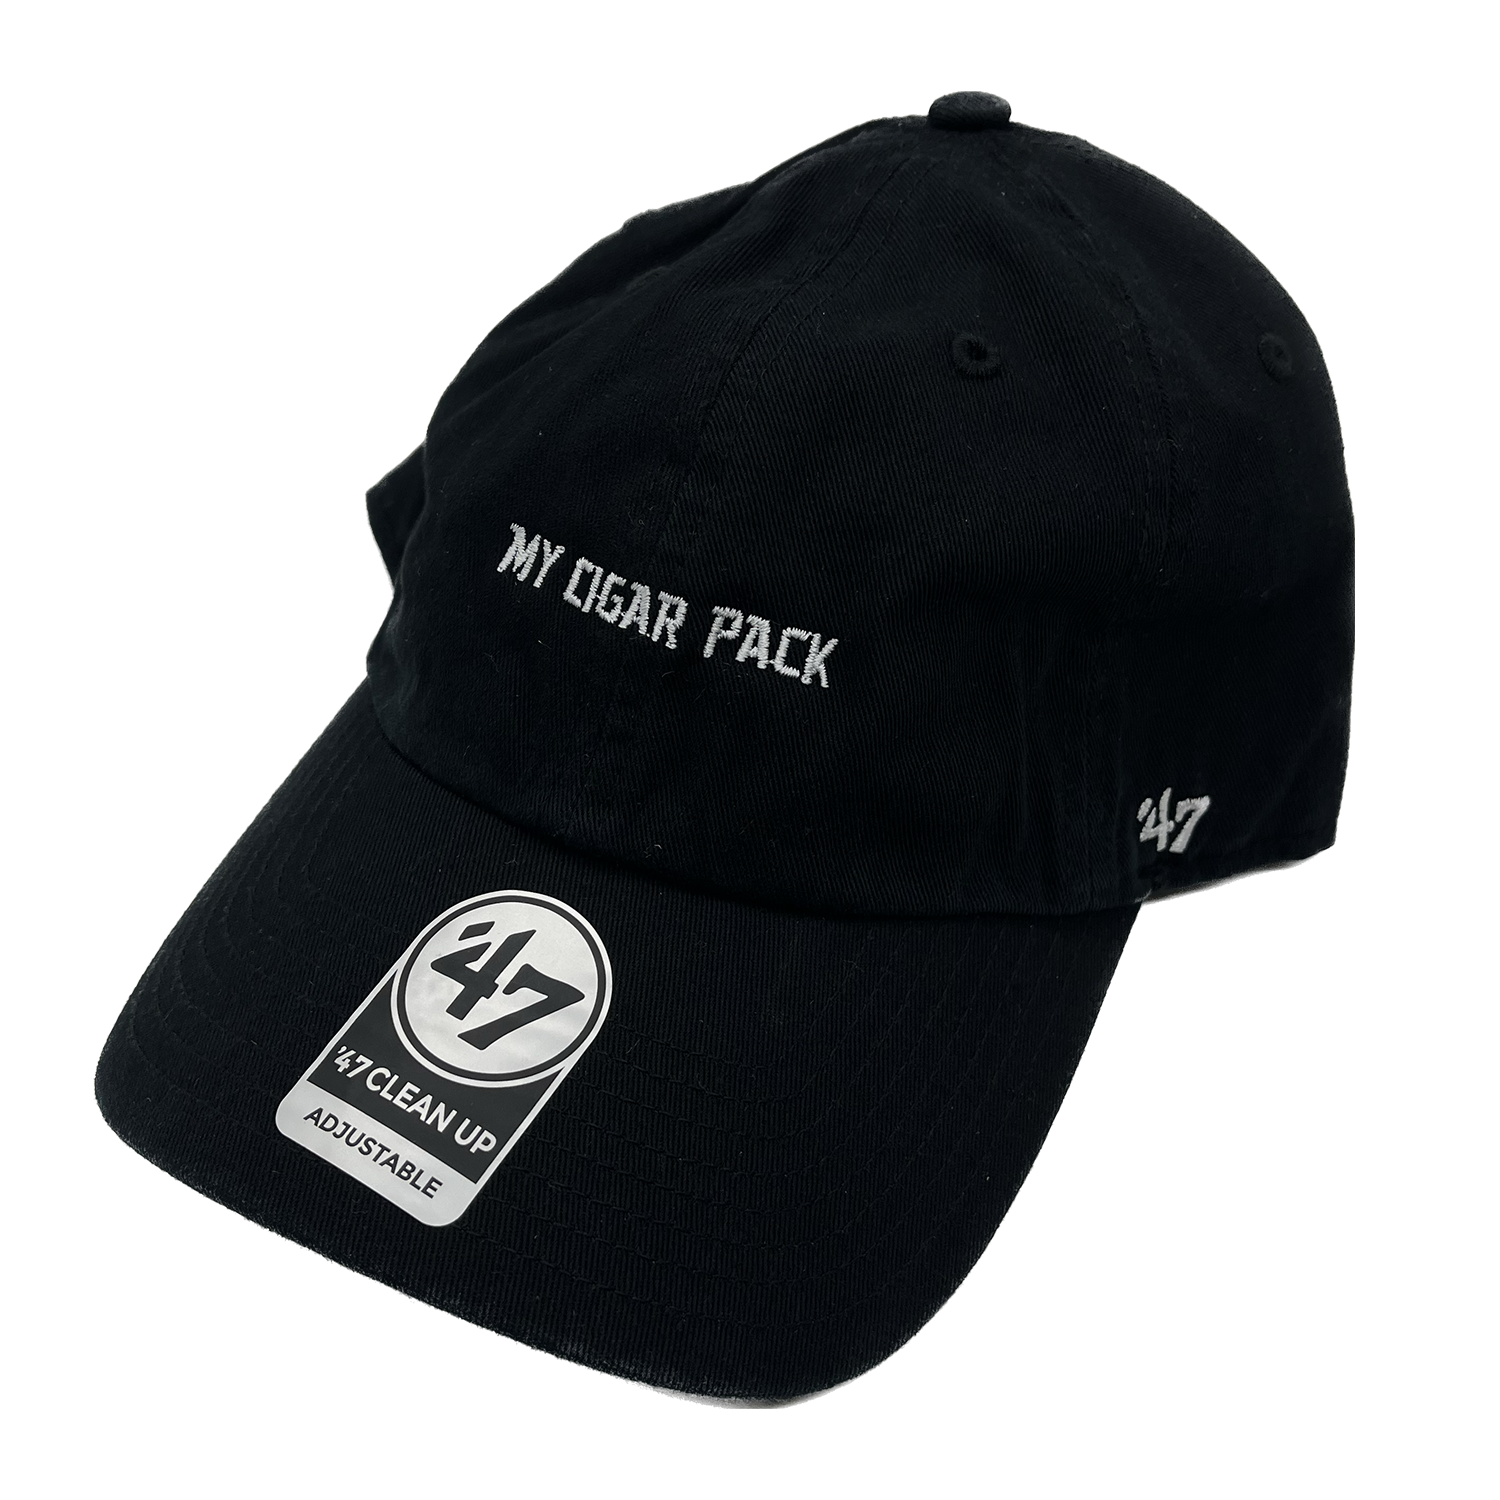 The My Cigar Pack Hat